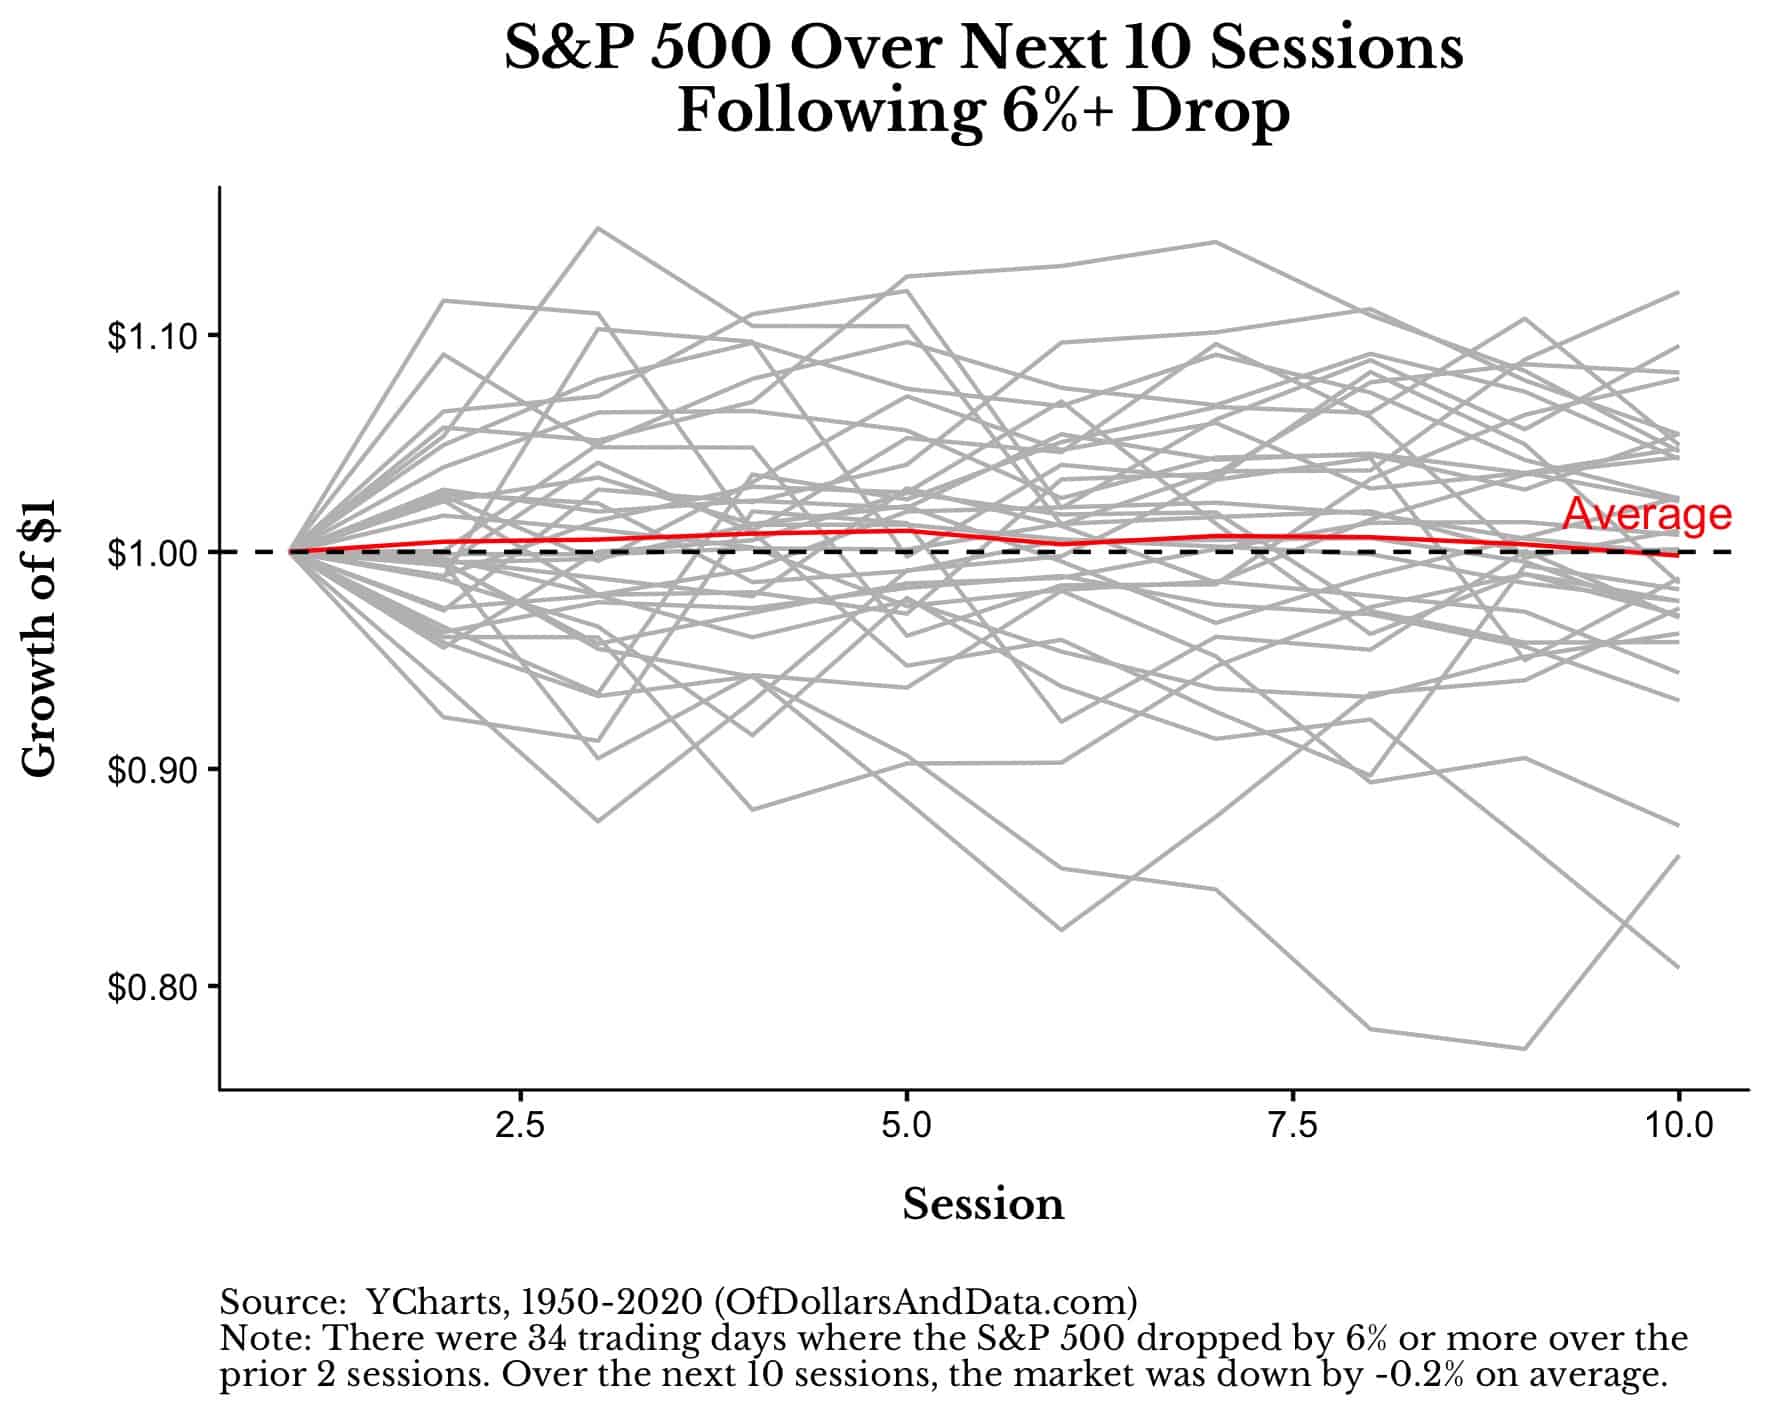 S&P 500 over next 10 sessions following a 6% or greater decline.